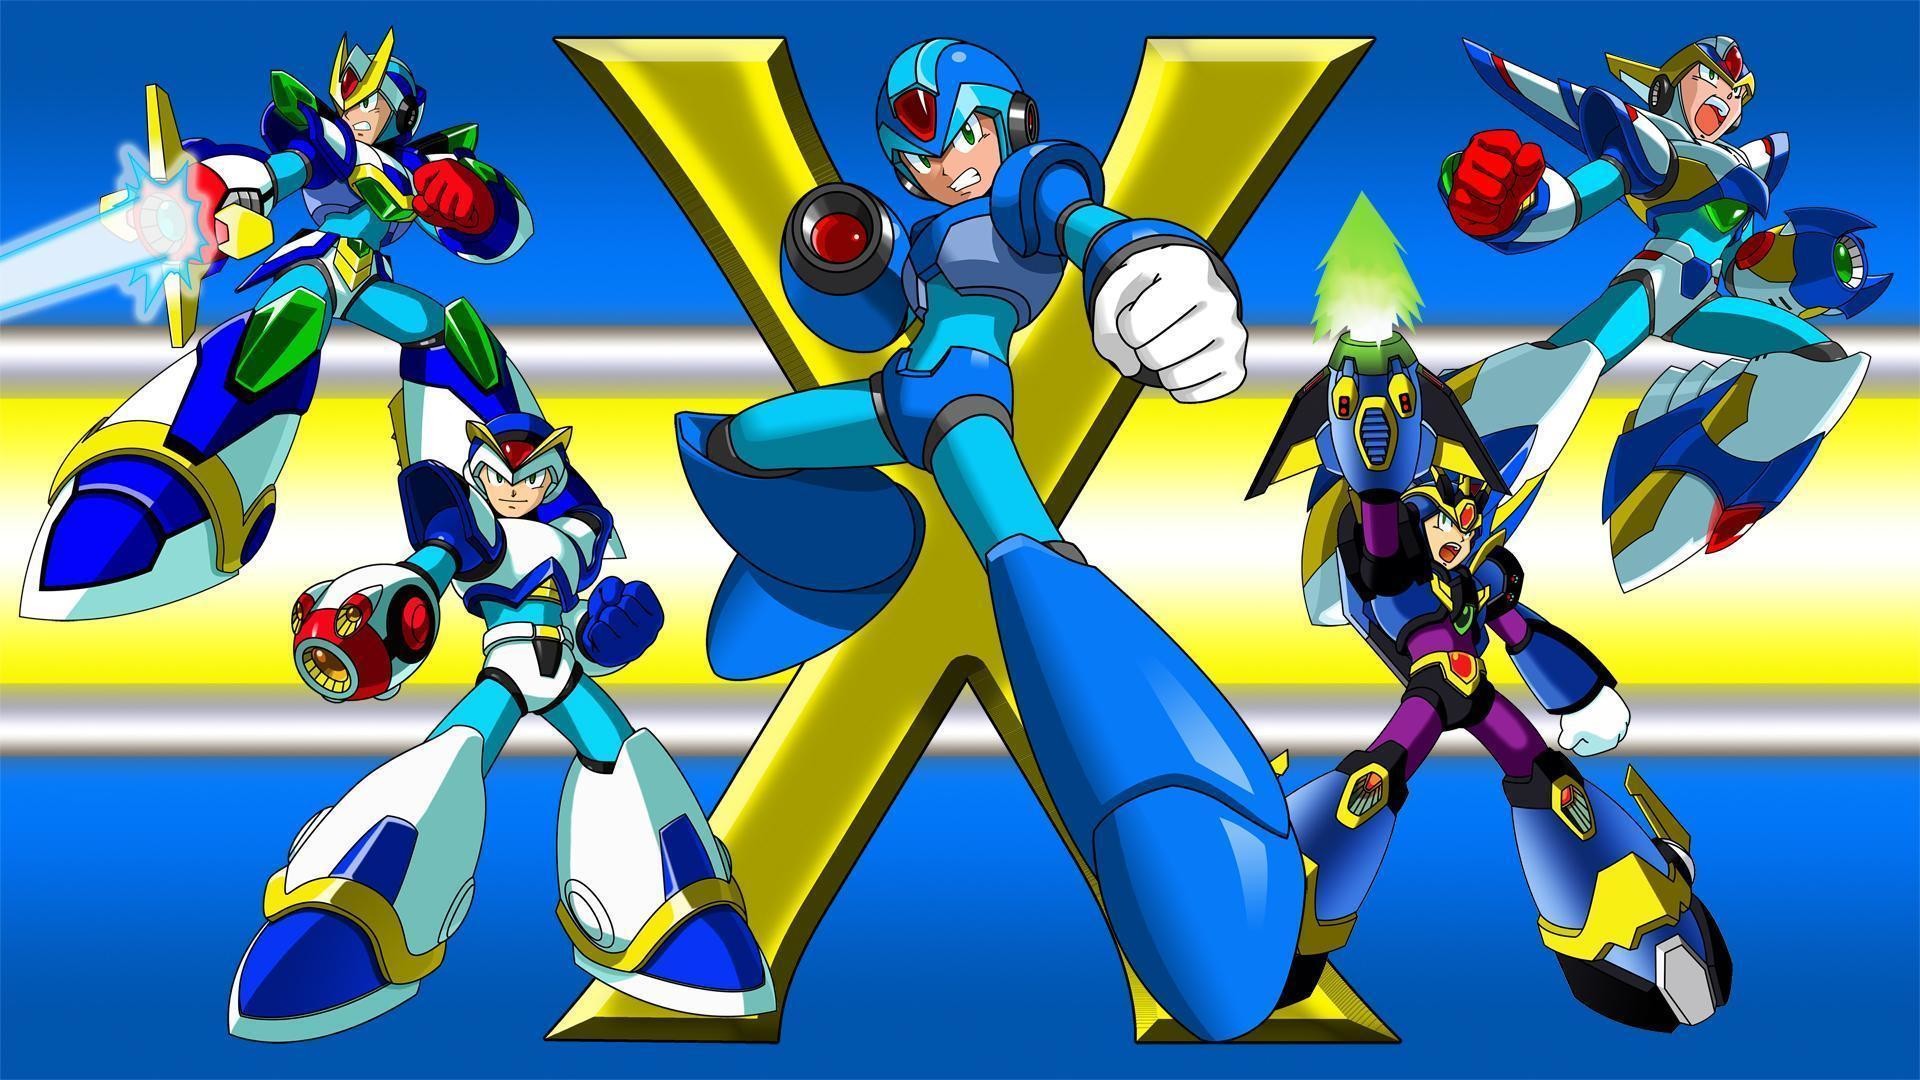 1920x1080 Mega Man X8 Background Free Download by Donella Kanter